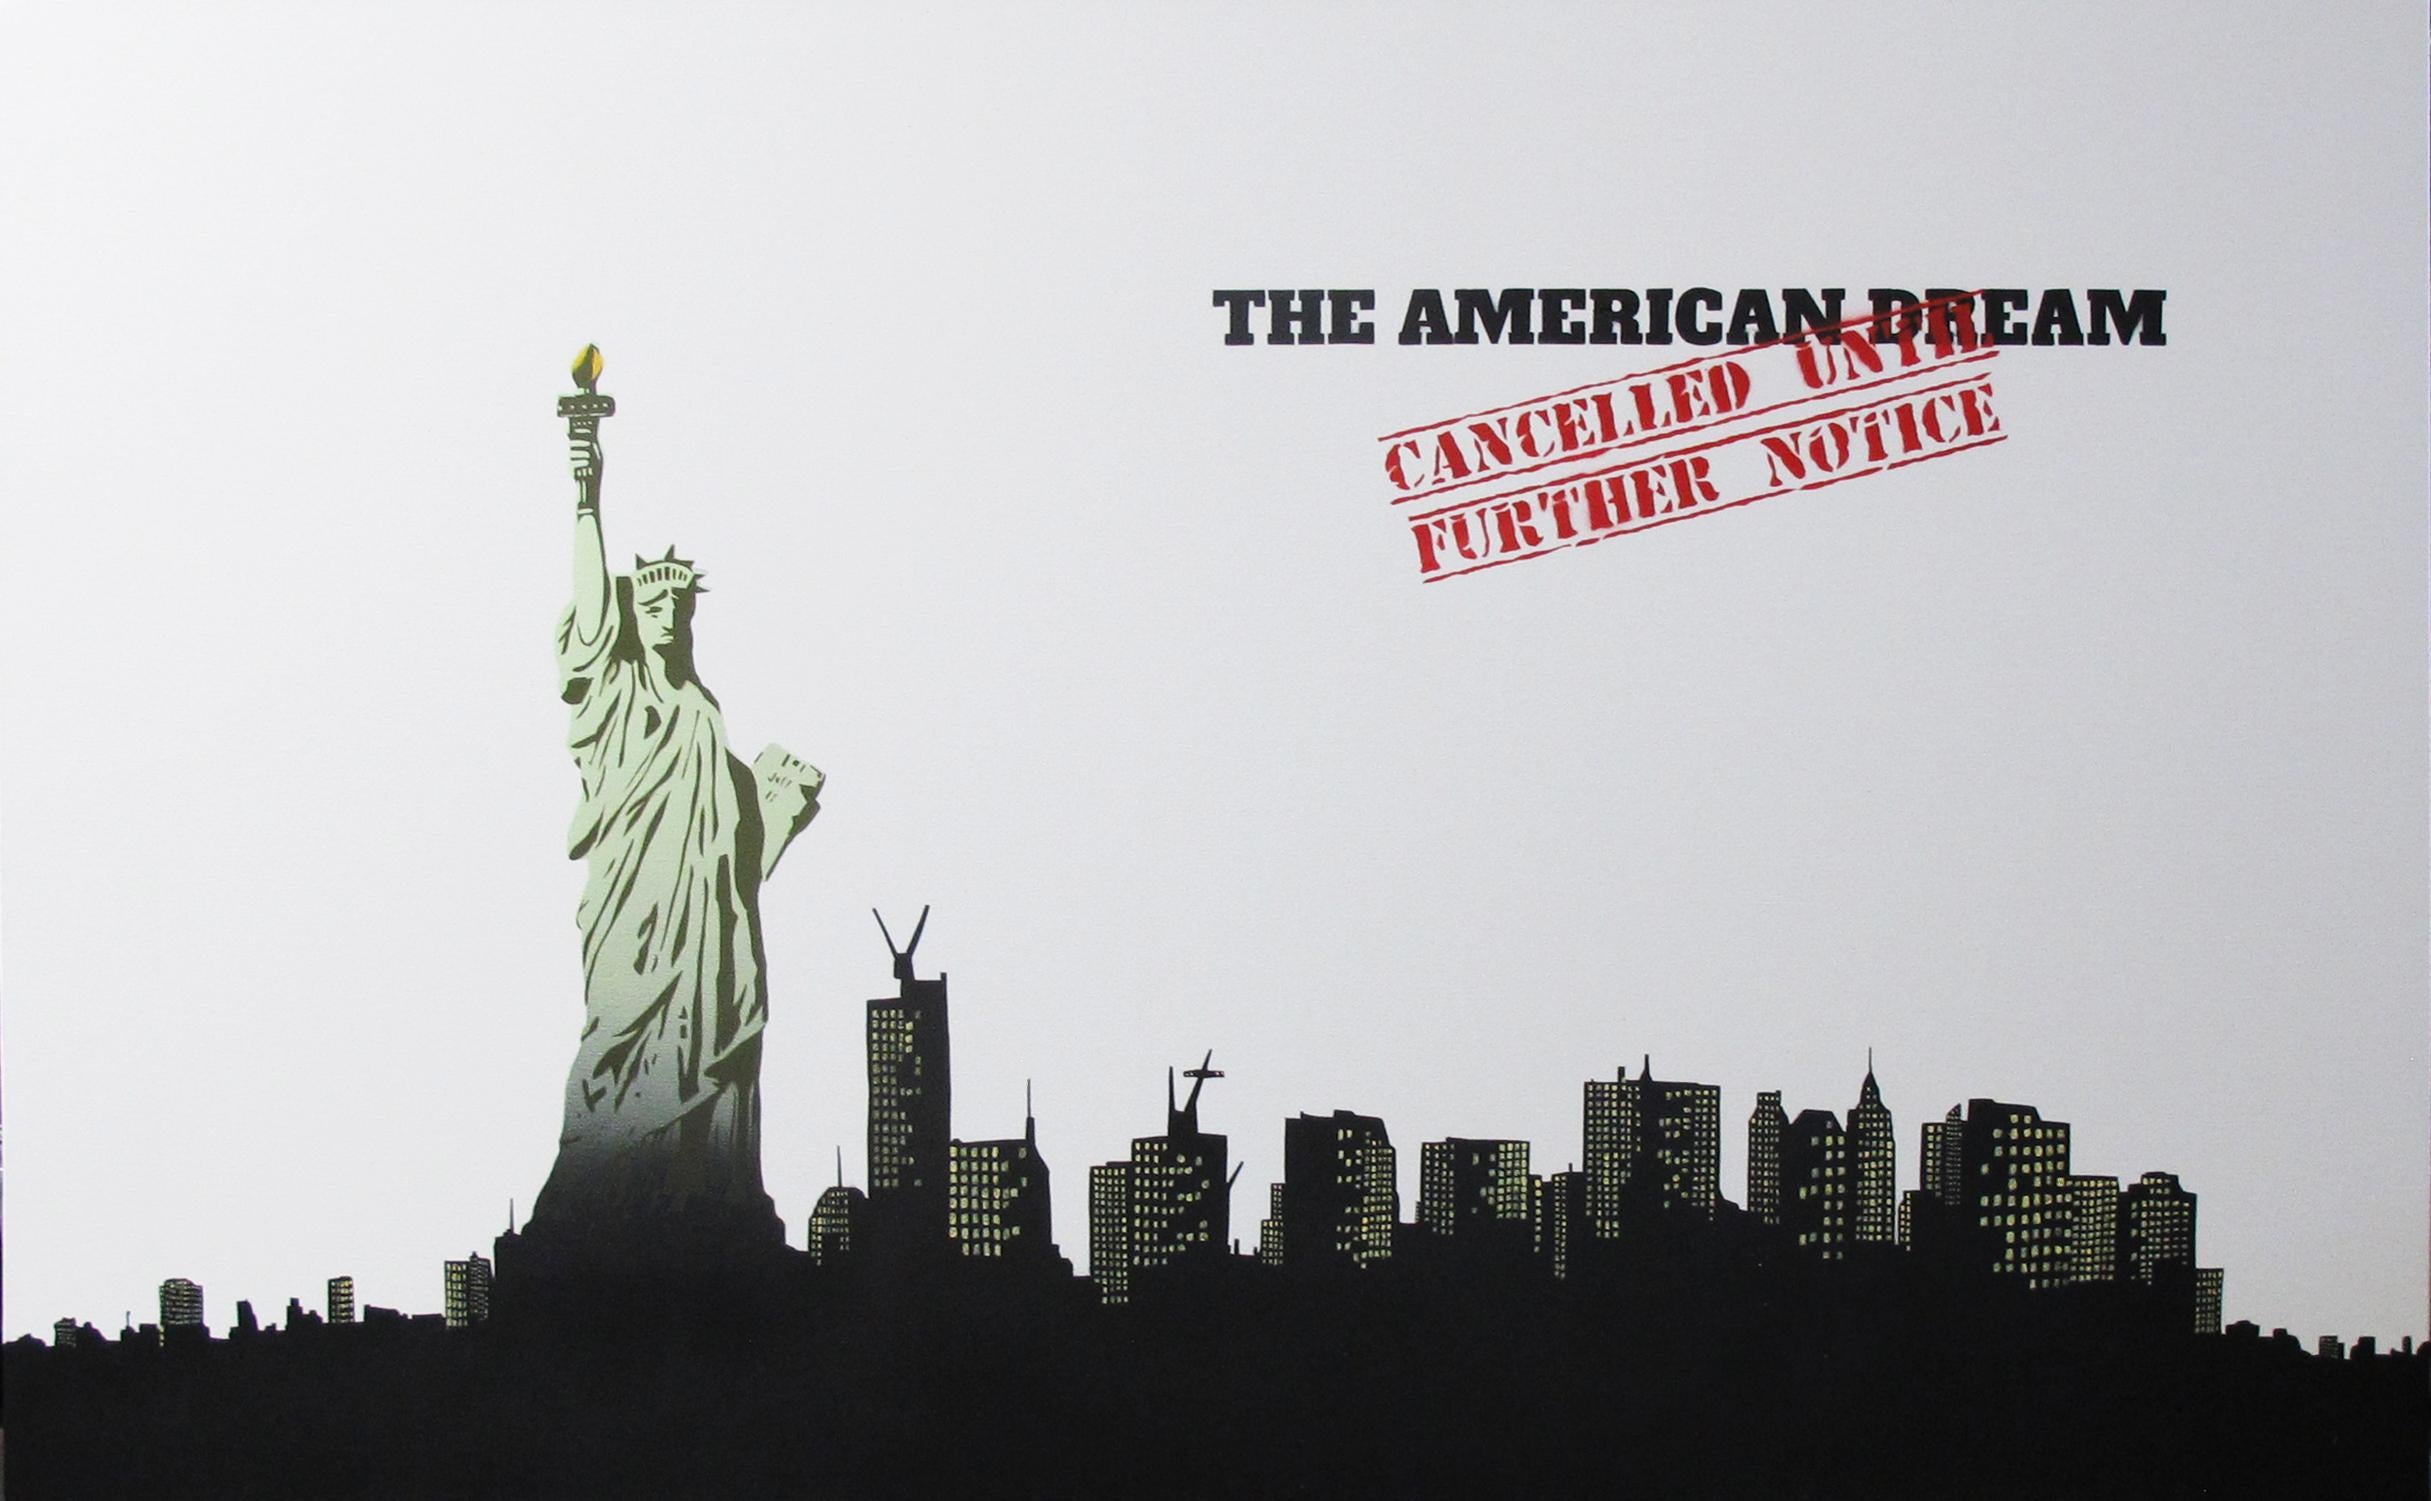 "The American Dream Cancelled" - Stencil Acrylic on Canvas 